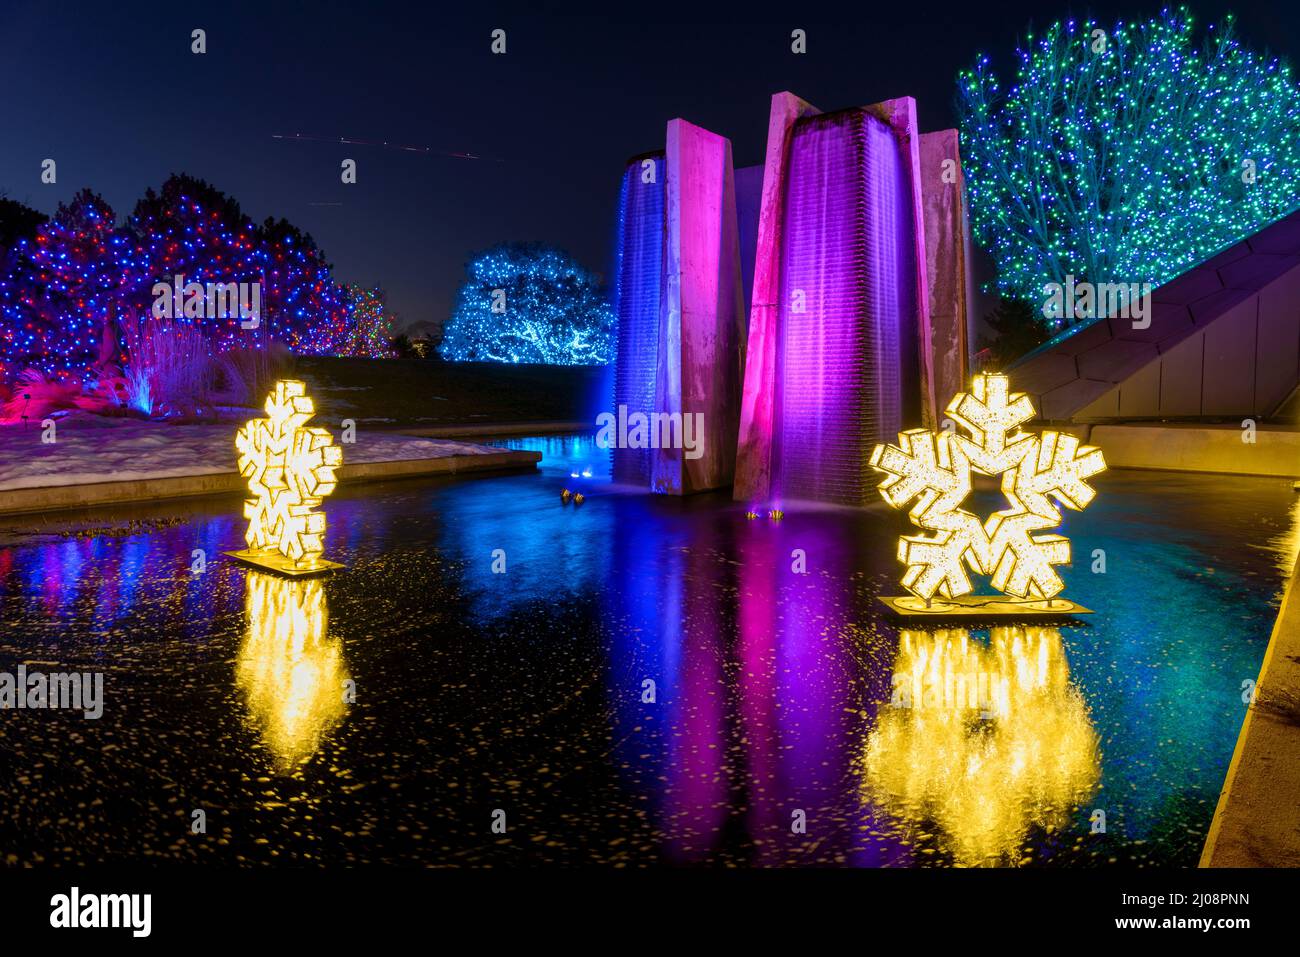 Holiday Light Show - Wide-angle night view of colorful light show at frozen pond in Denver Botanic Gardens during its holiday Blossoms of Light event. Stock Photo